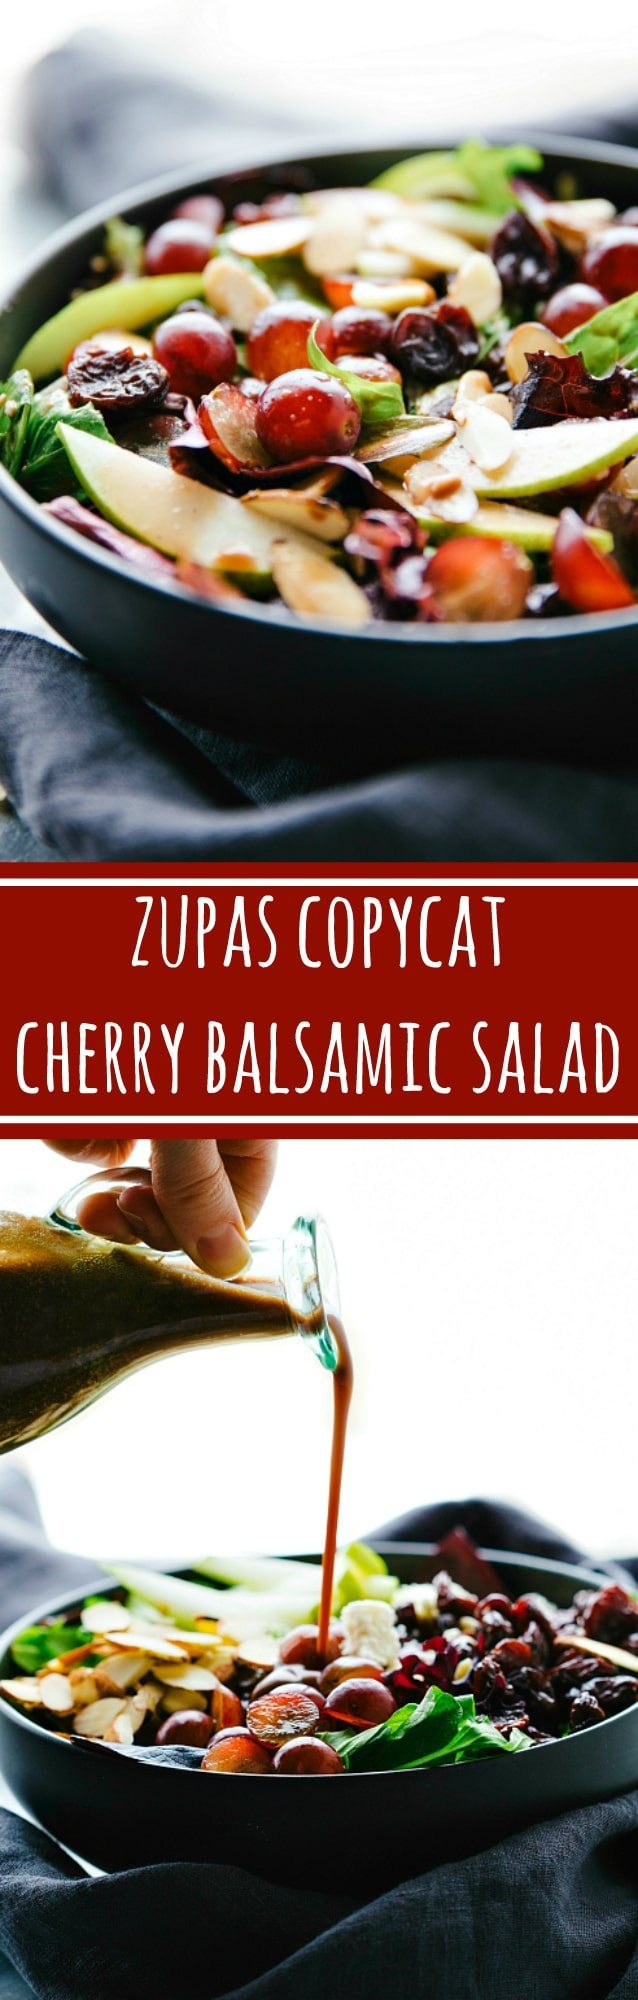 The easiest blender cherry balsamic dressing on a simple Zupas copycat salad!